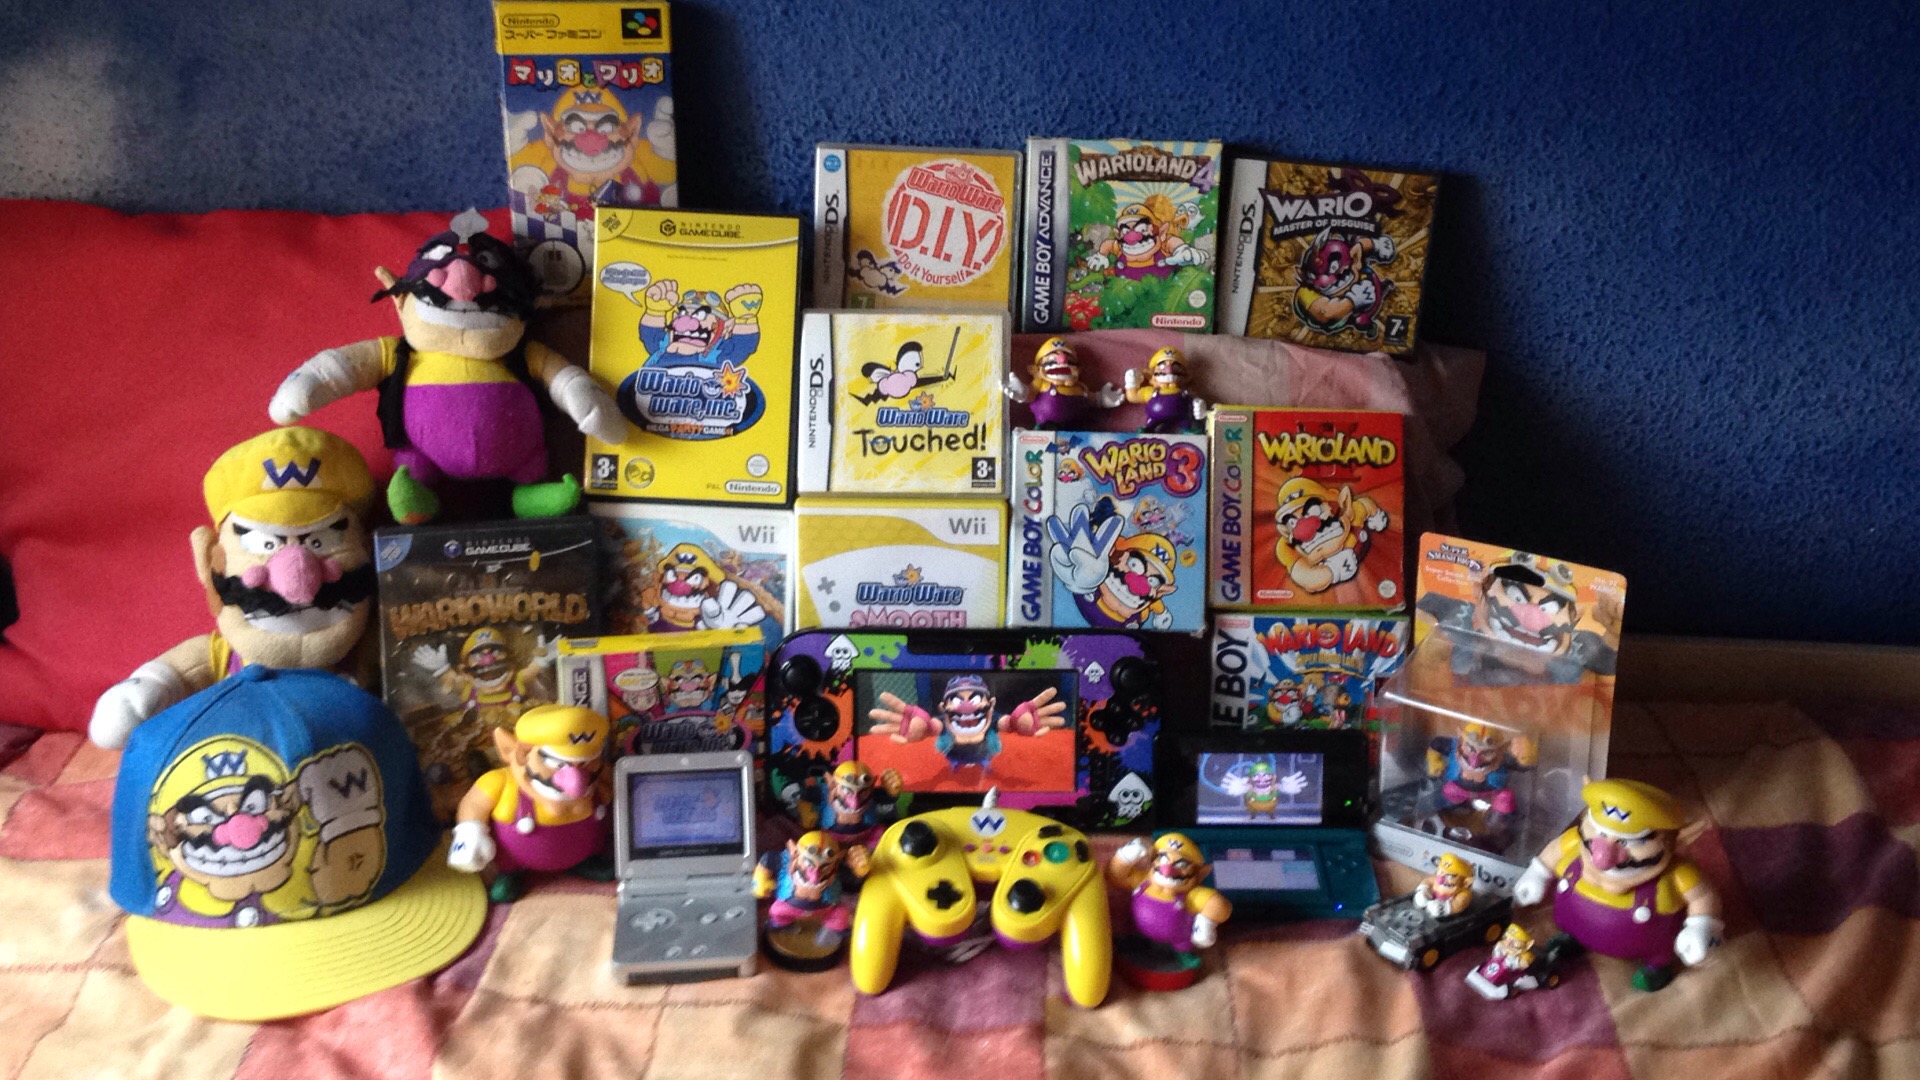 My Wario collection